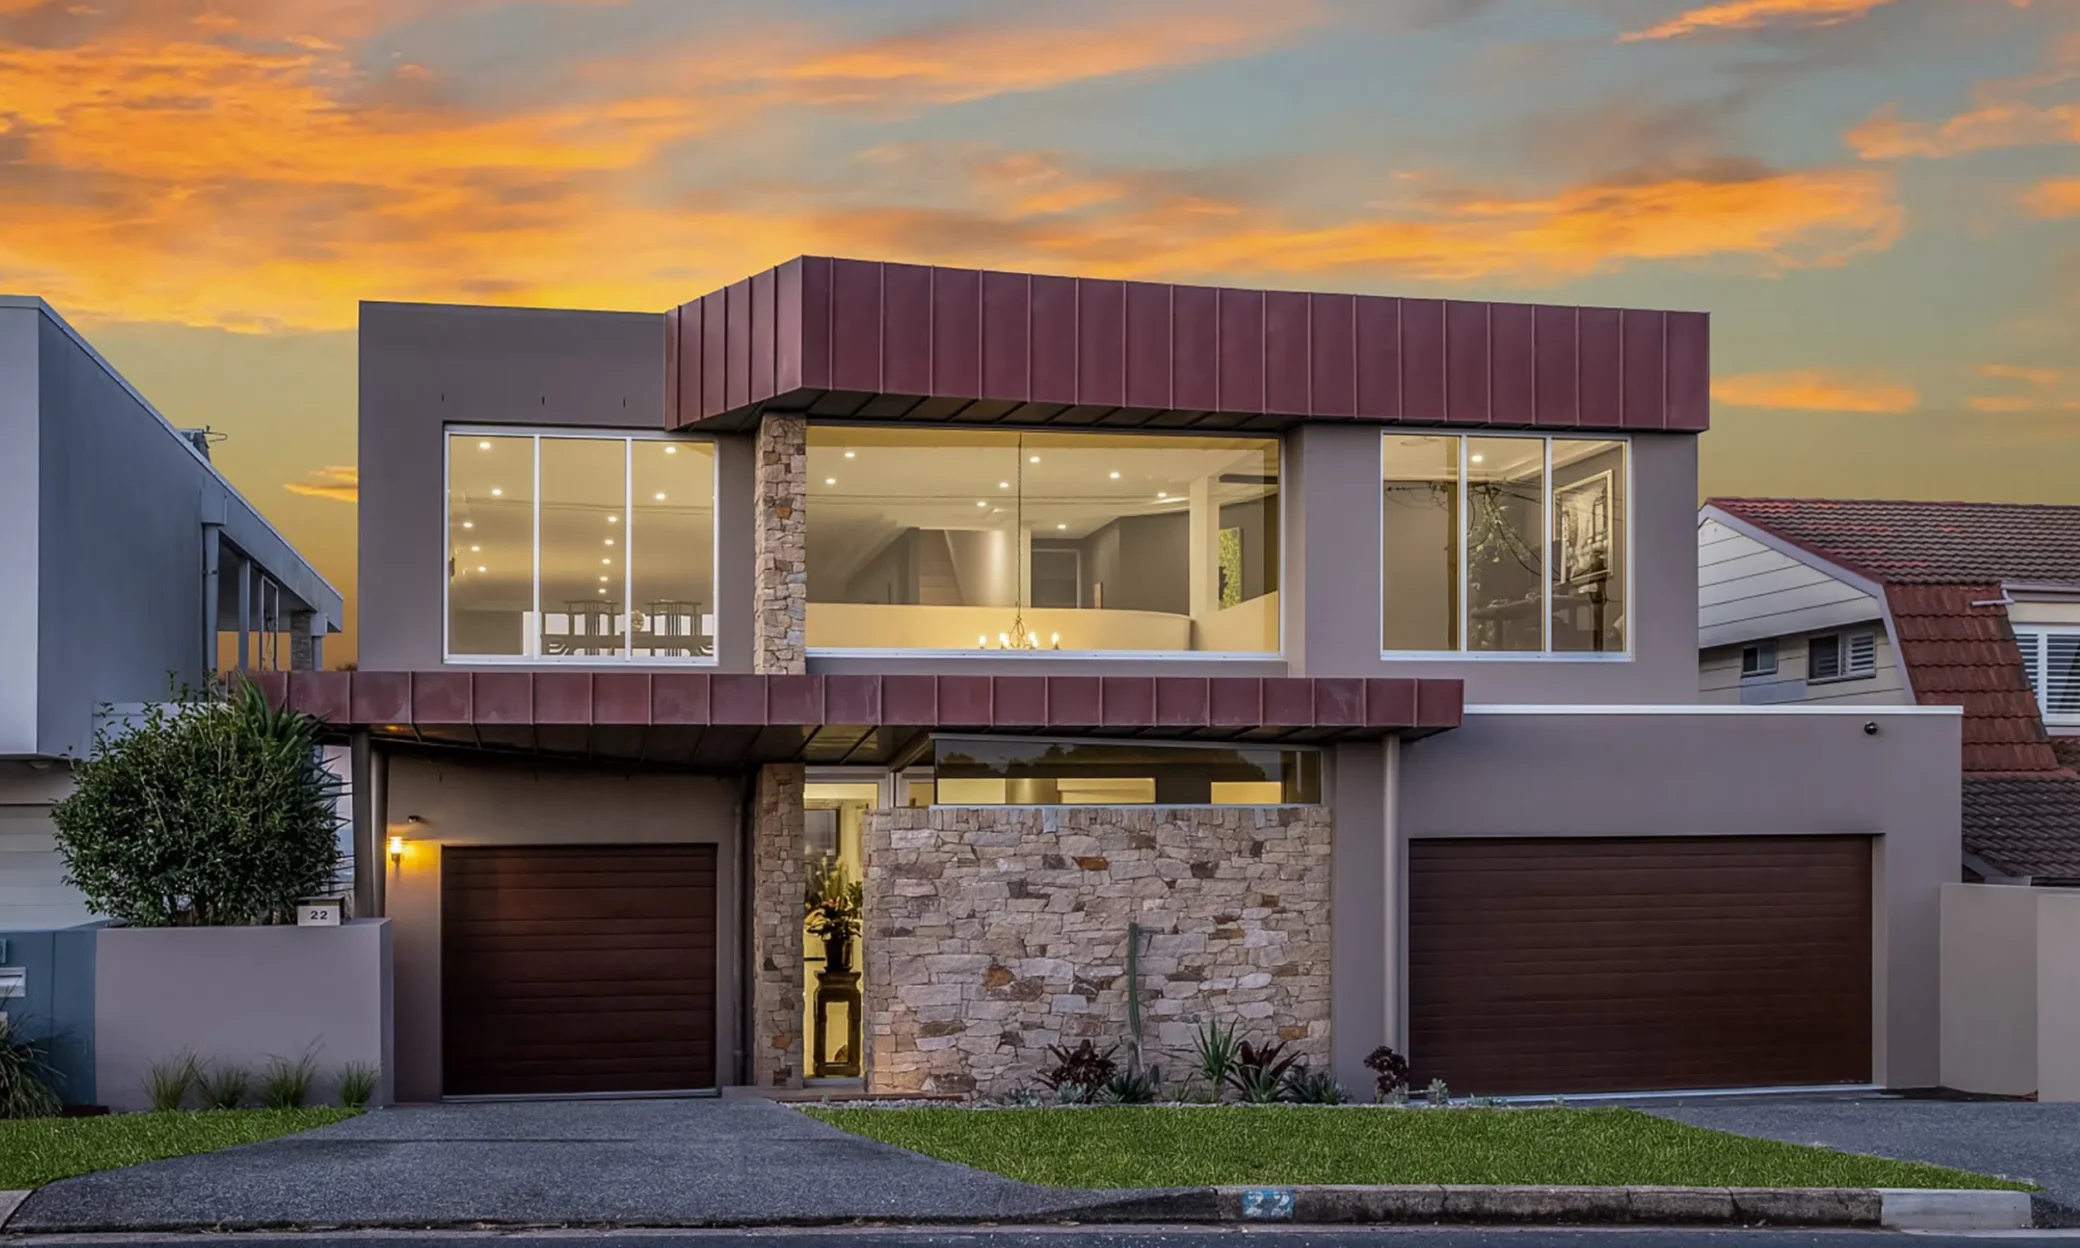 Modern two-story house featuring a striking upper facade with large glass windows and a balcony, grounded by stone-clad and wooden garage doors, set against a dramatic sunset sky with orange and pink hues in Newcastle